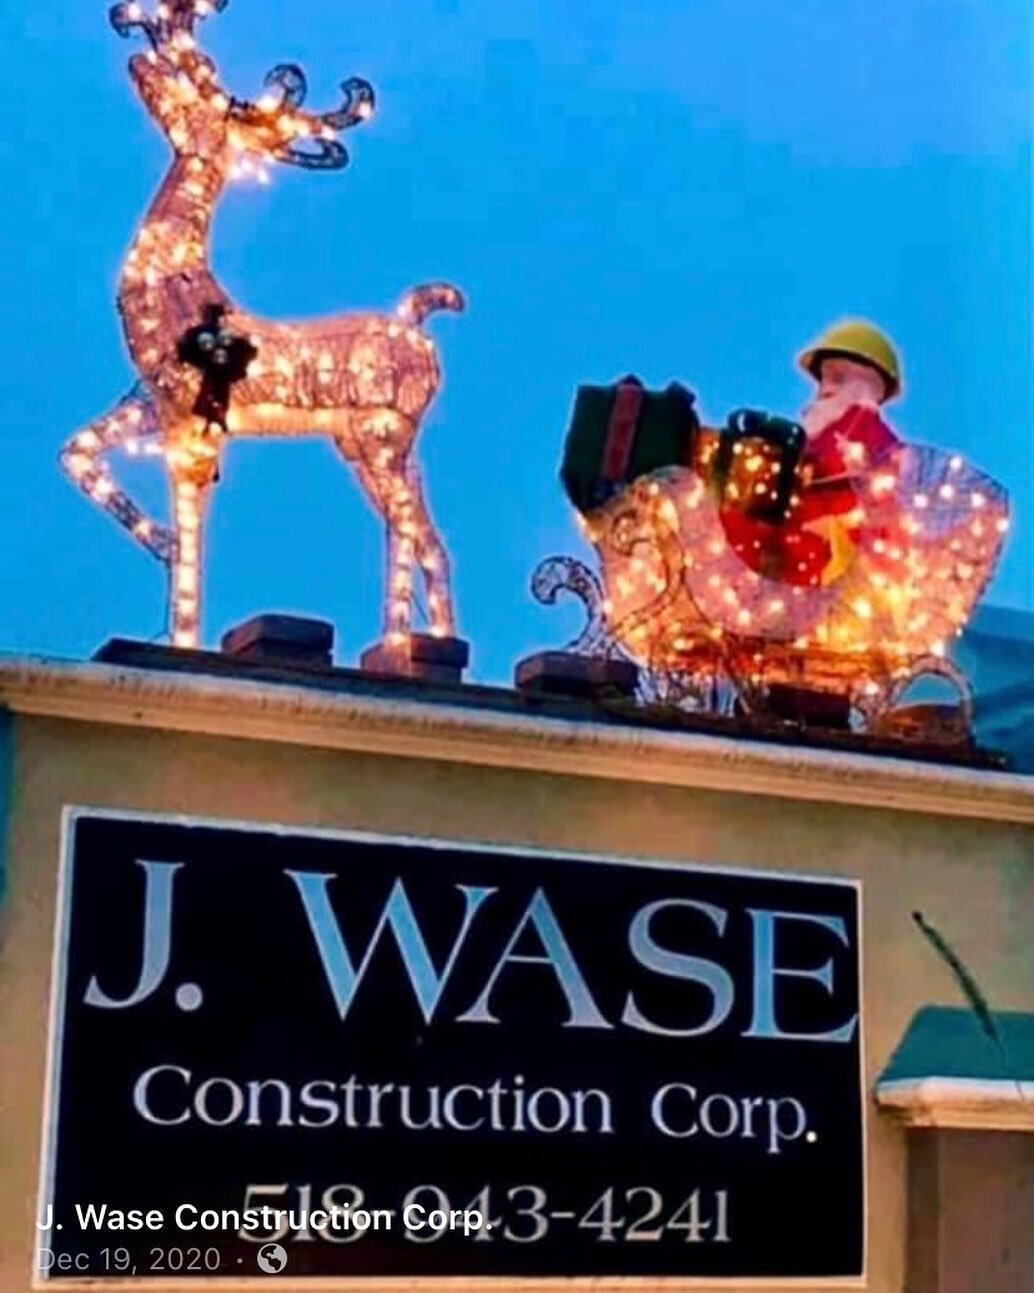 Merry Christmas and a Happy New year from all of us at J. Wase Construction Corp. Celebrate and be thankful for everyday. #family#friends#clients